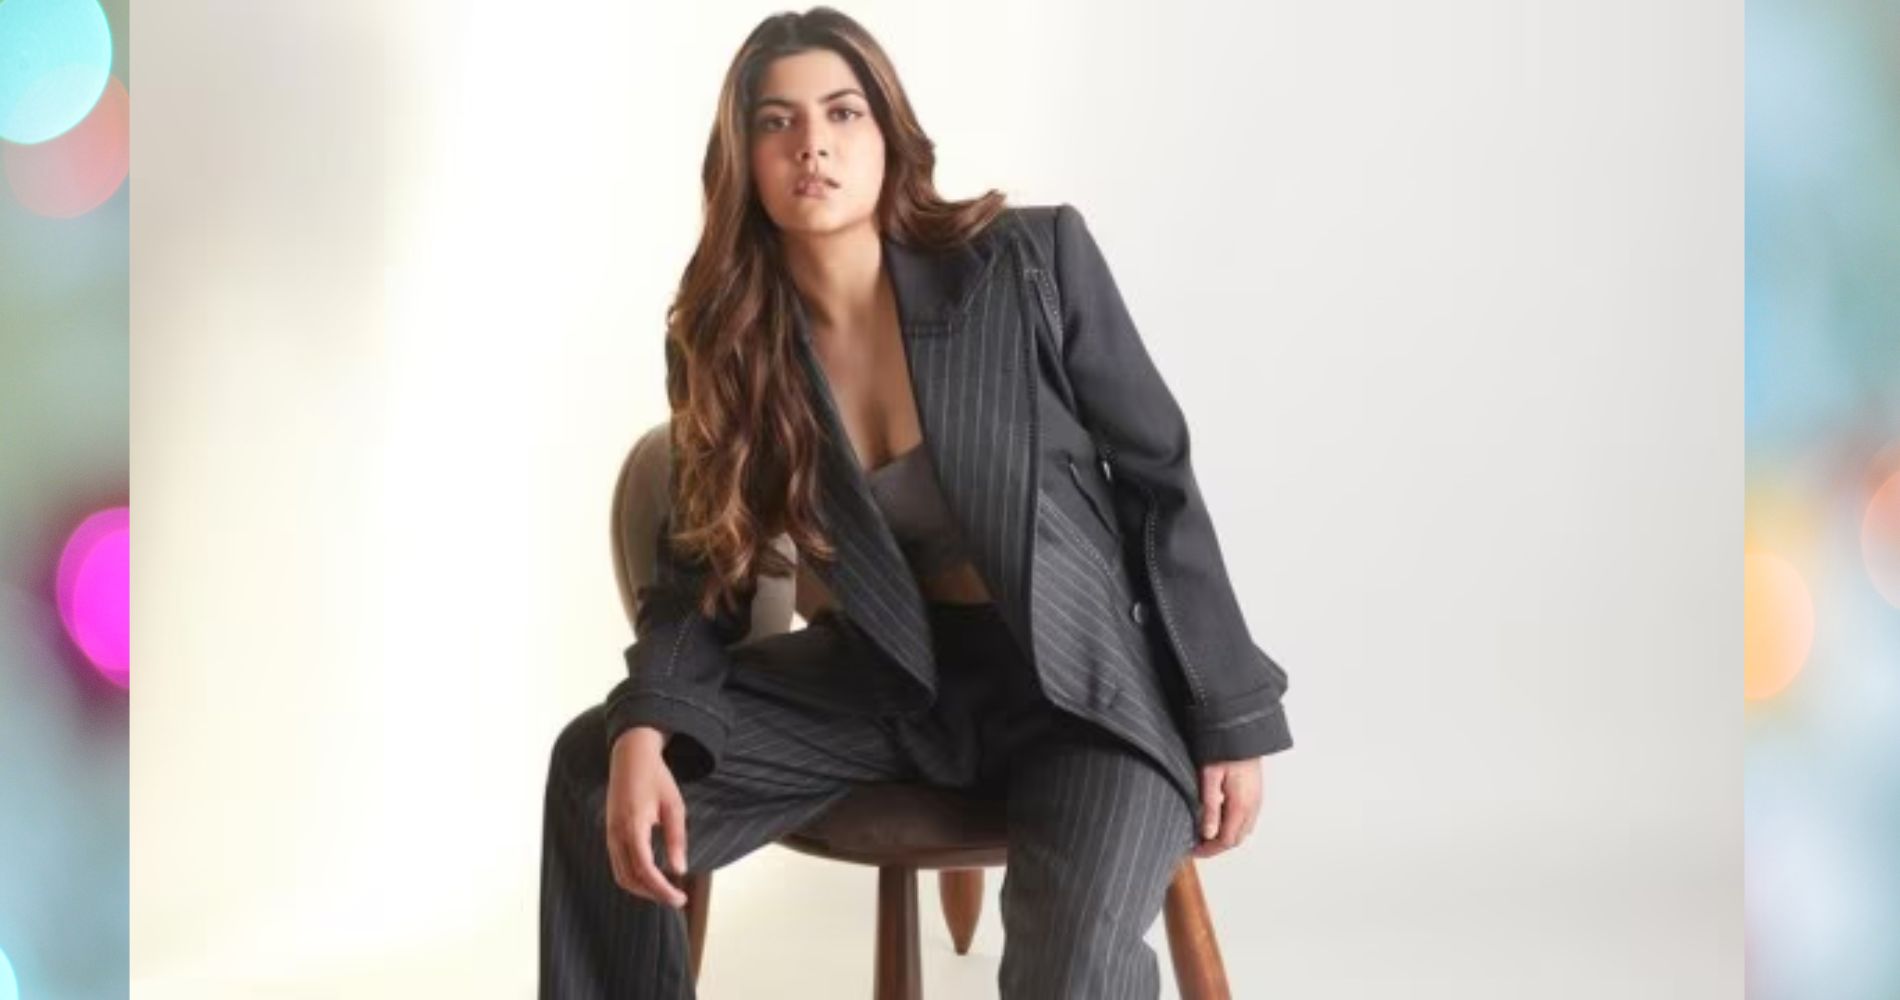 Ananya Birla Leaves Music To Focus On Business: Aims To